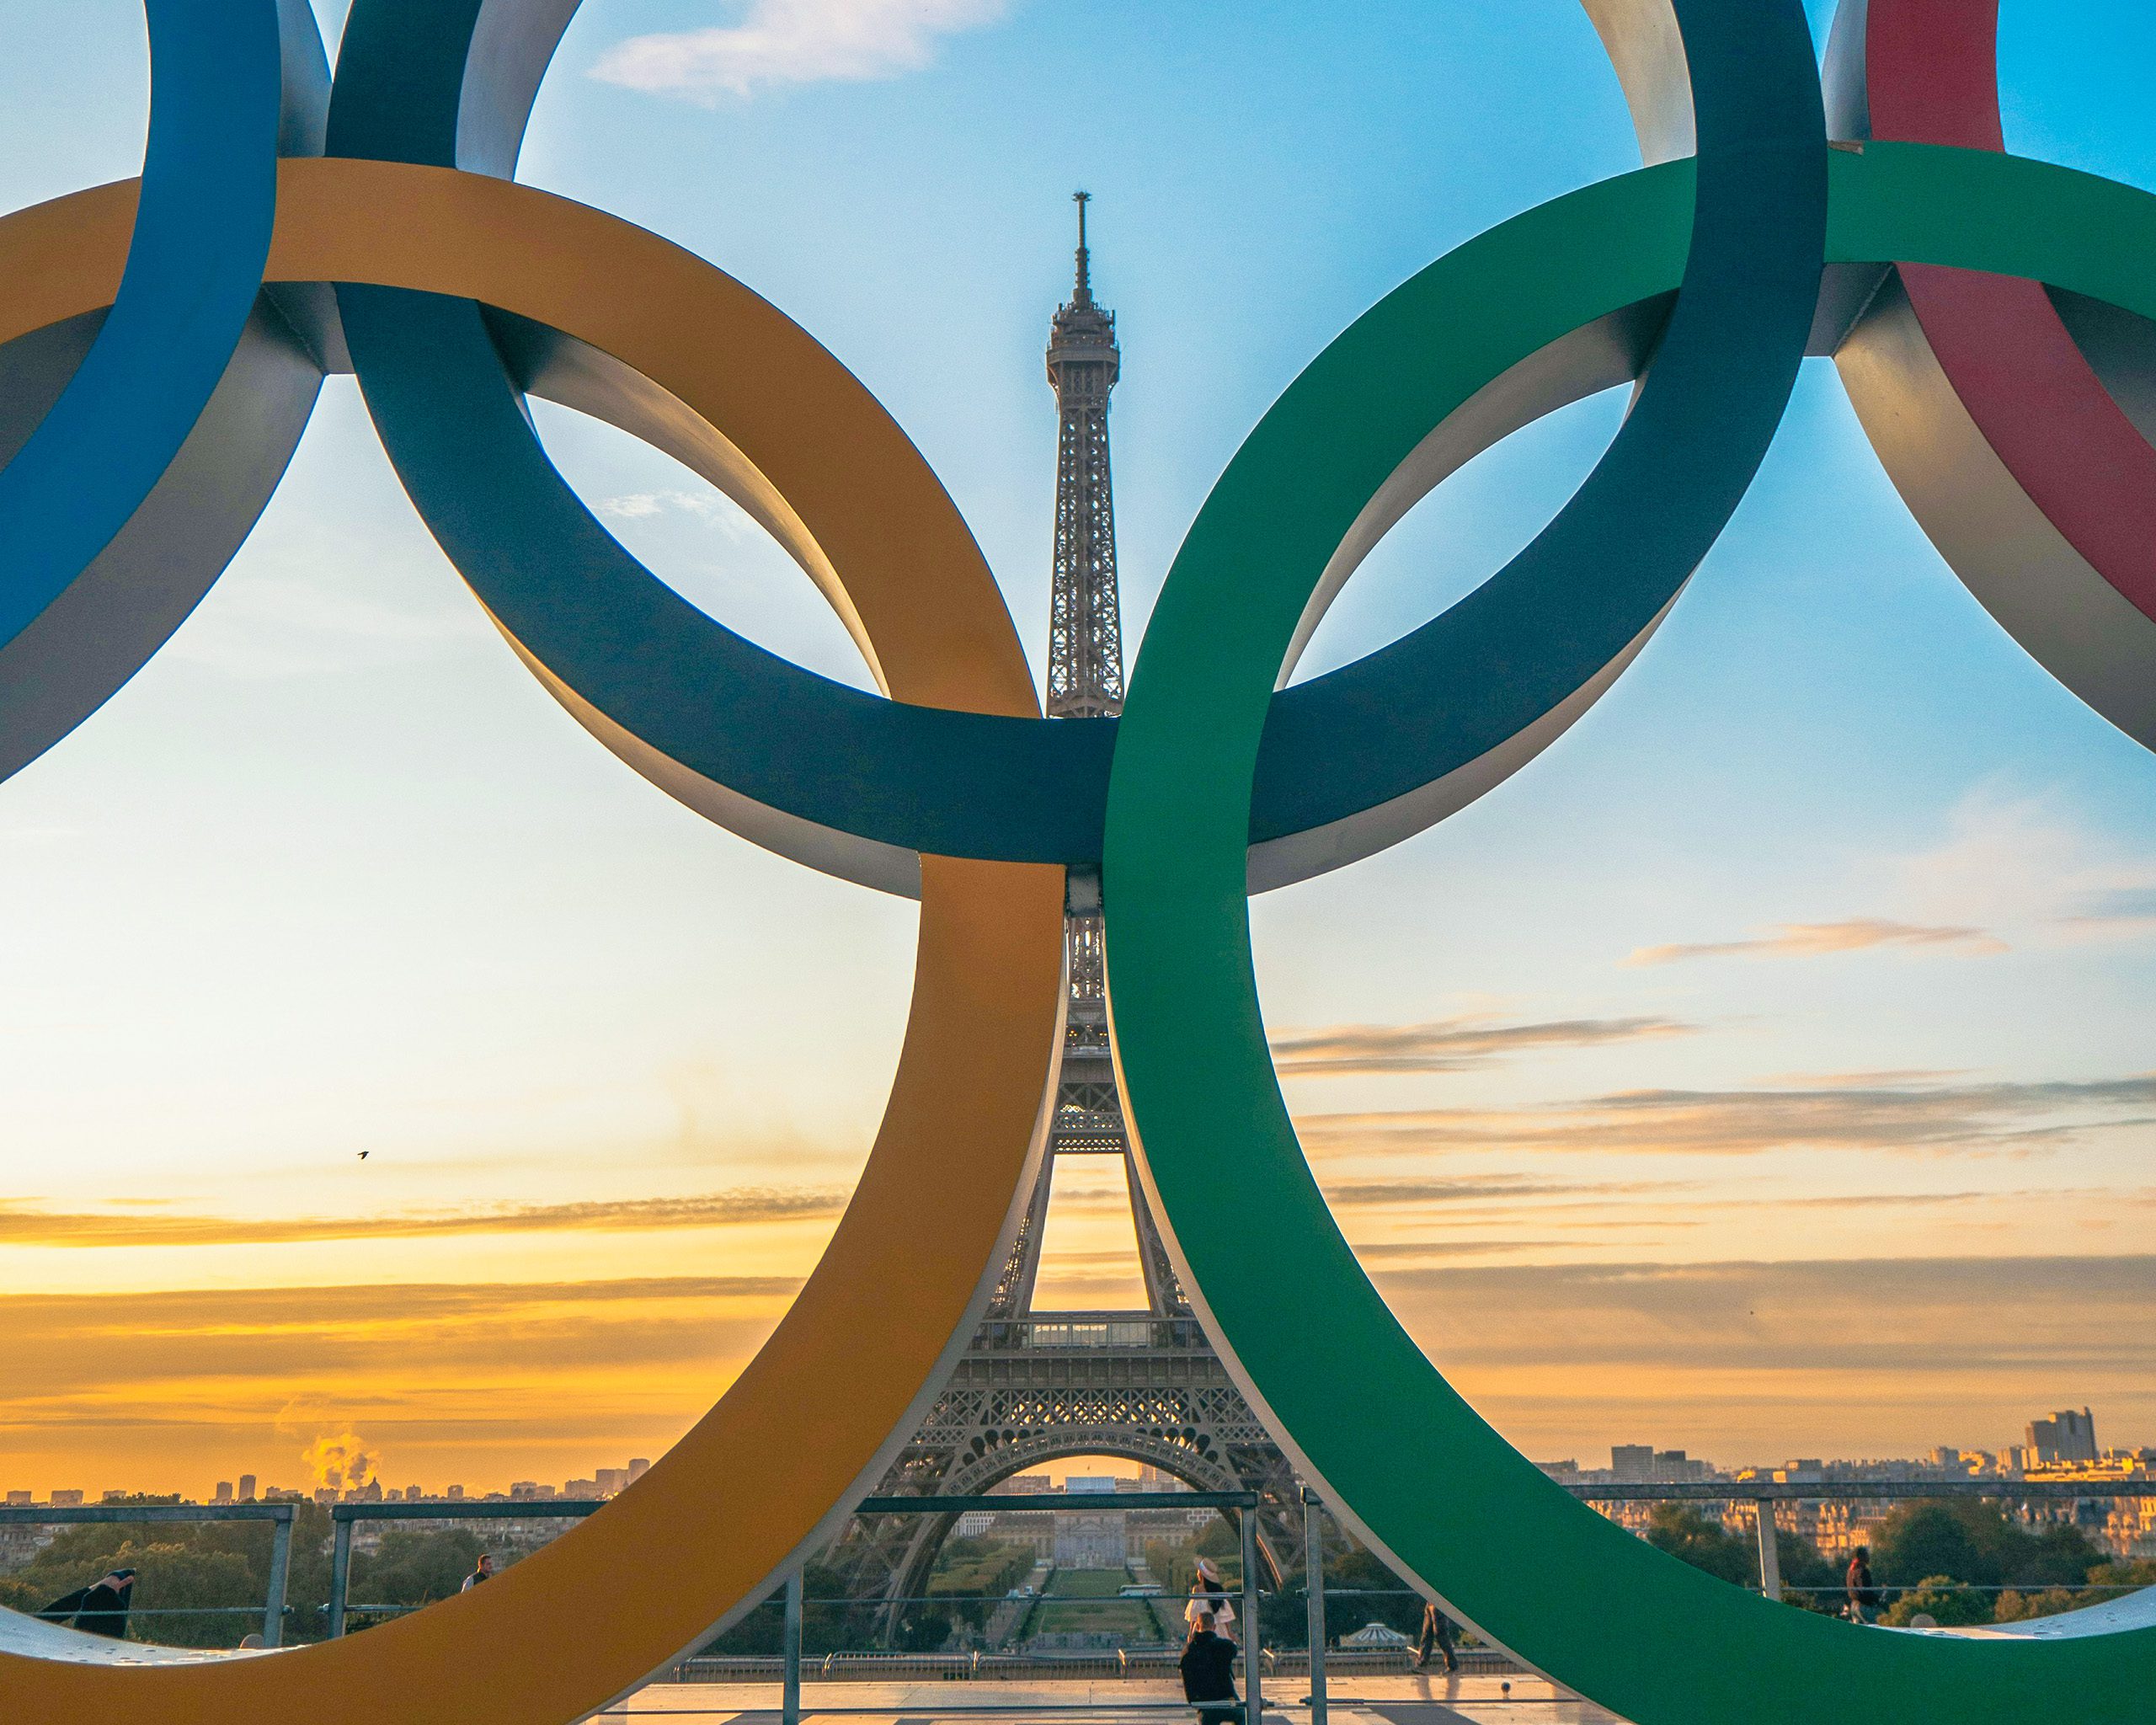 The Paris Olympics in 2024 | Davidsbeenhere